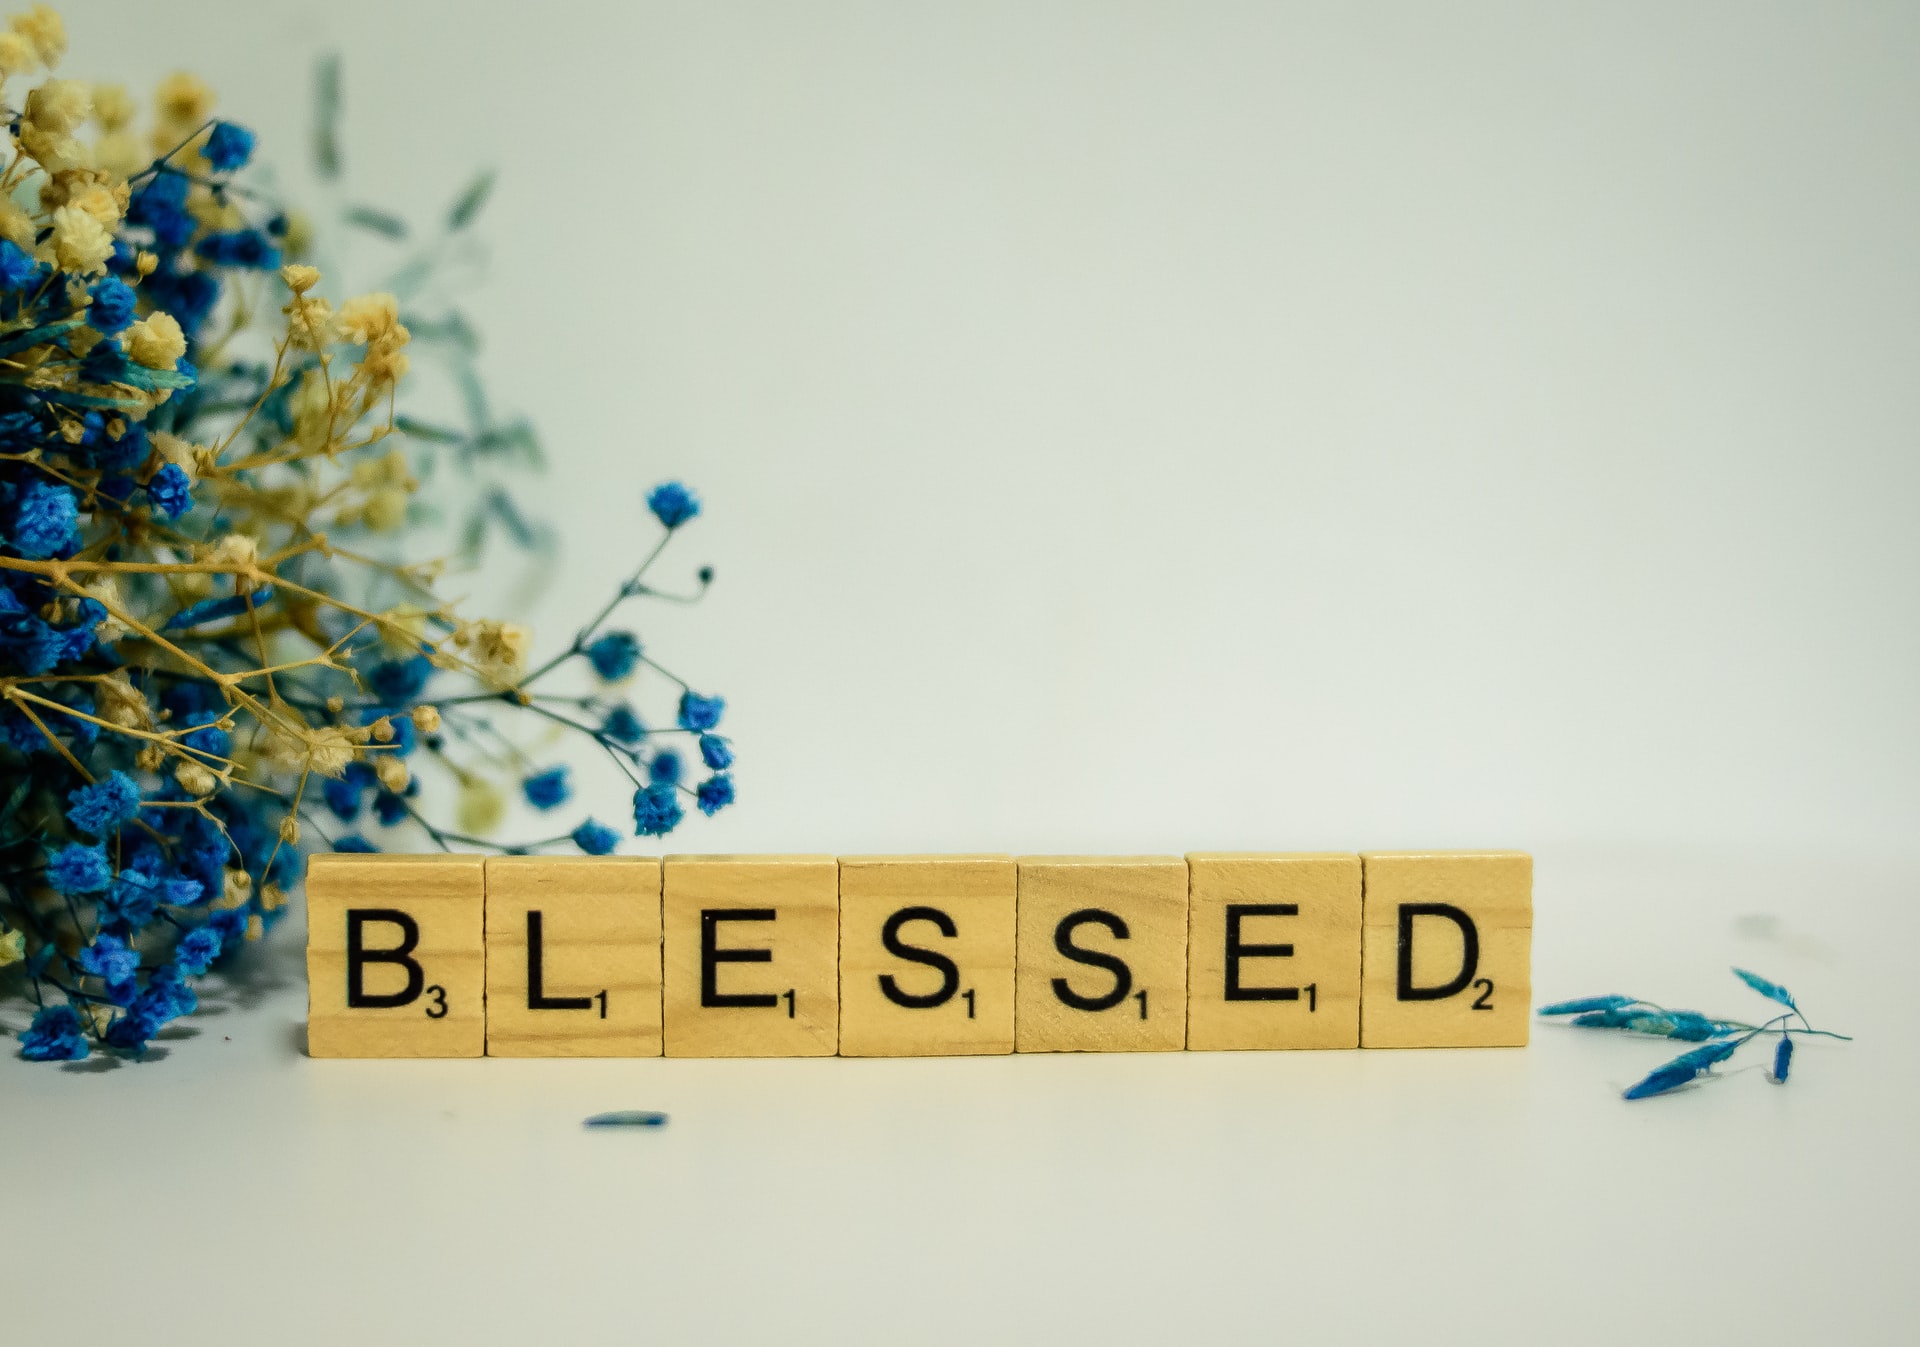 “Blessed Beyond Measure” Meaning